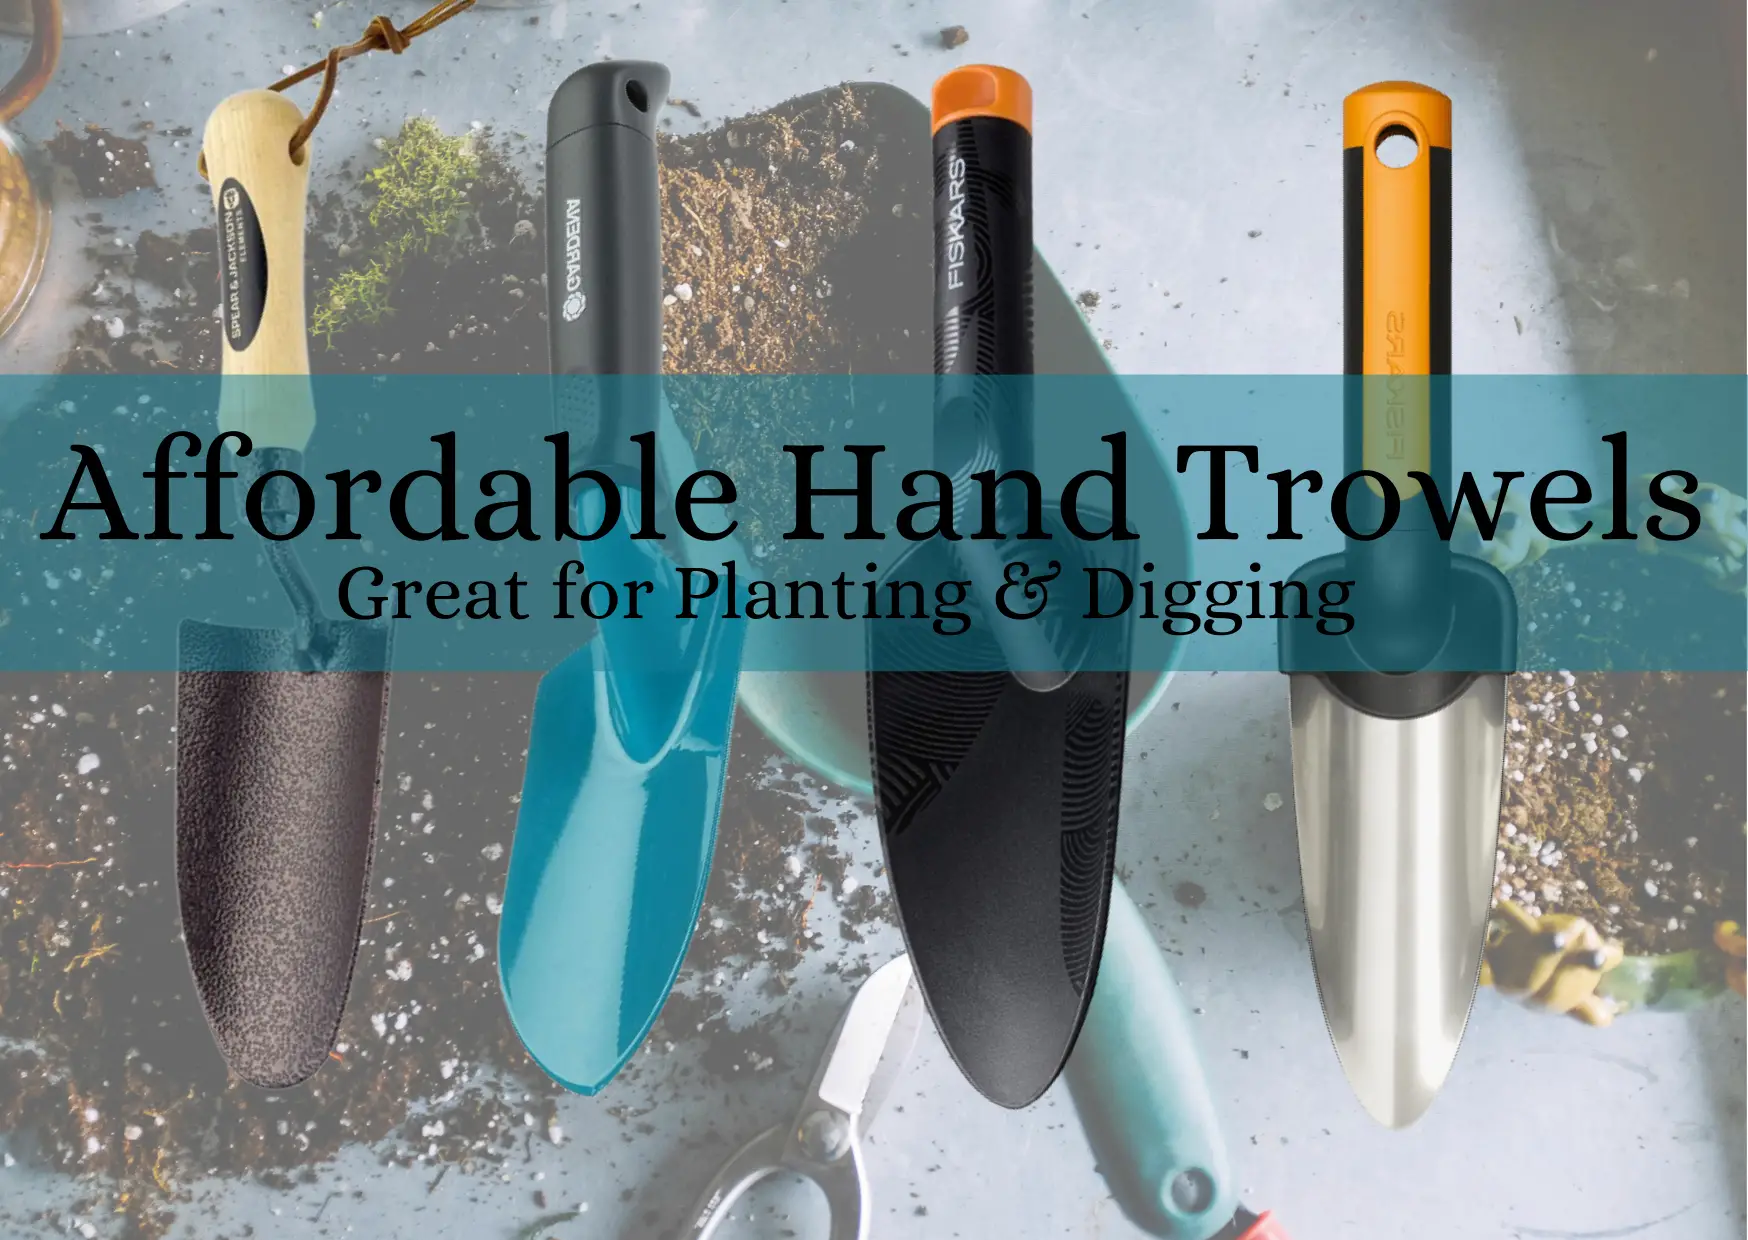 Affordable Hand Trowels